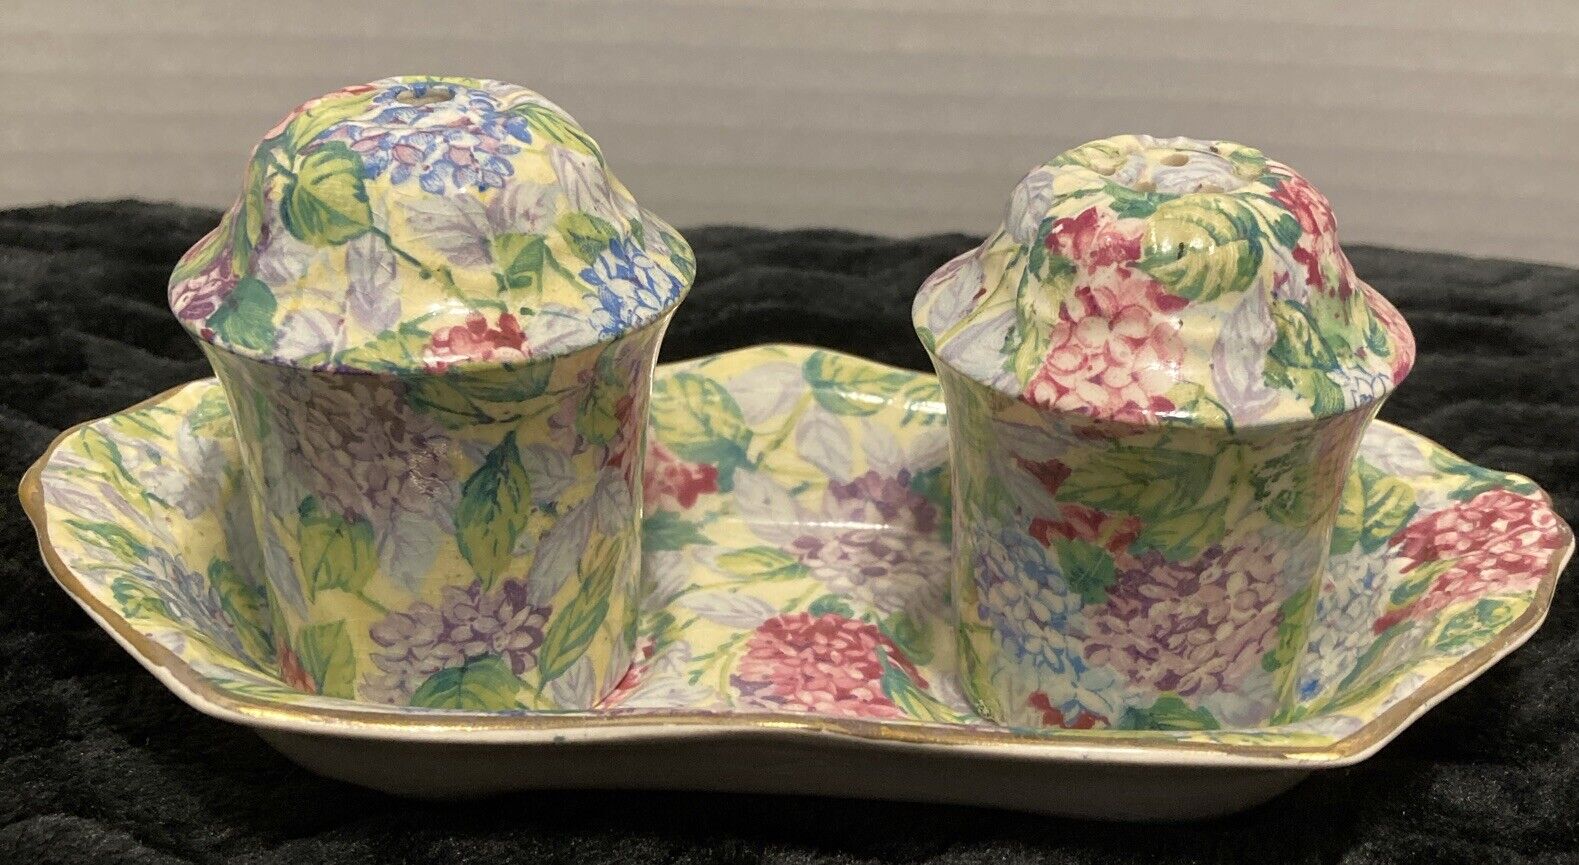 Vintage James Kent”Hydrangeas “ Porcelain Salt And Pepper Shakers With Tray